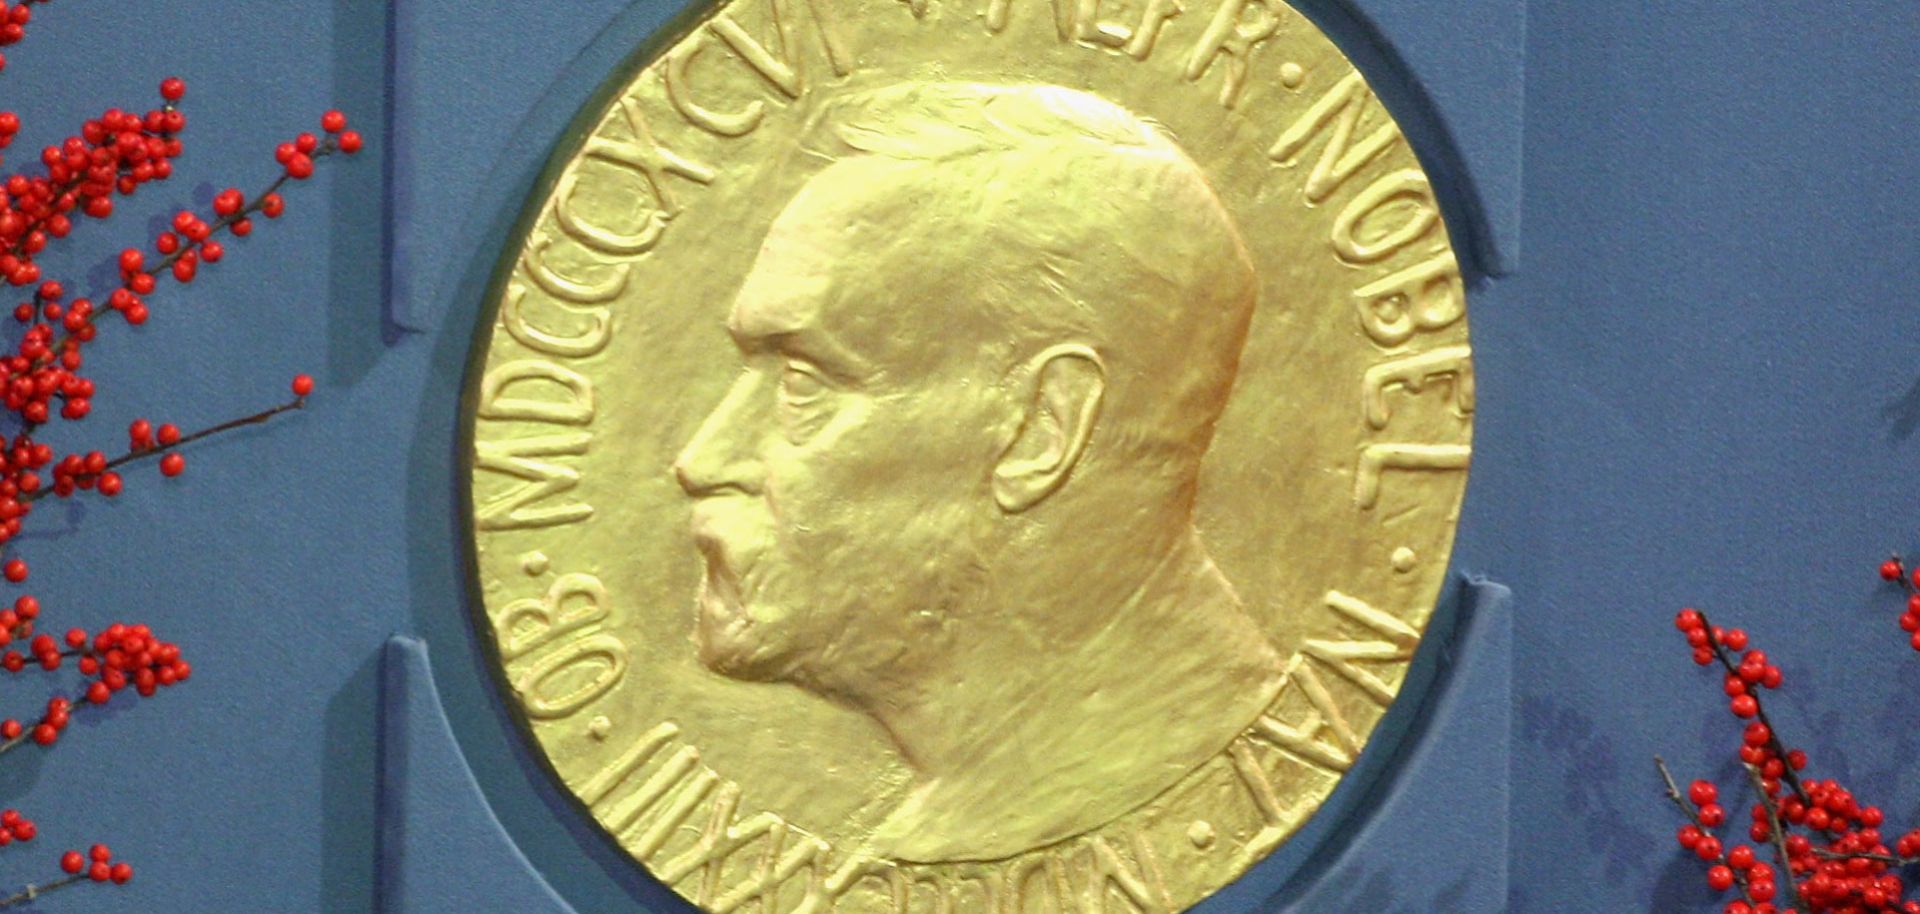 A plaque of Alfred Nobel is displayed at the 2008 Nobel Peace Prize ceremony. Receiving the Nobel Prize is considered the pinnacle of many scientists', economists' and humanitarians' careers, recognizing significant discoveries. These tend to have lasting geopolitical consequences.